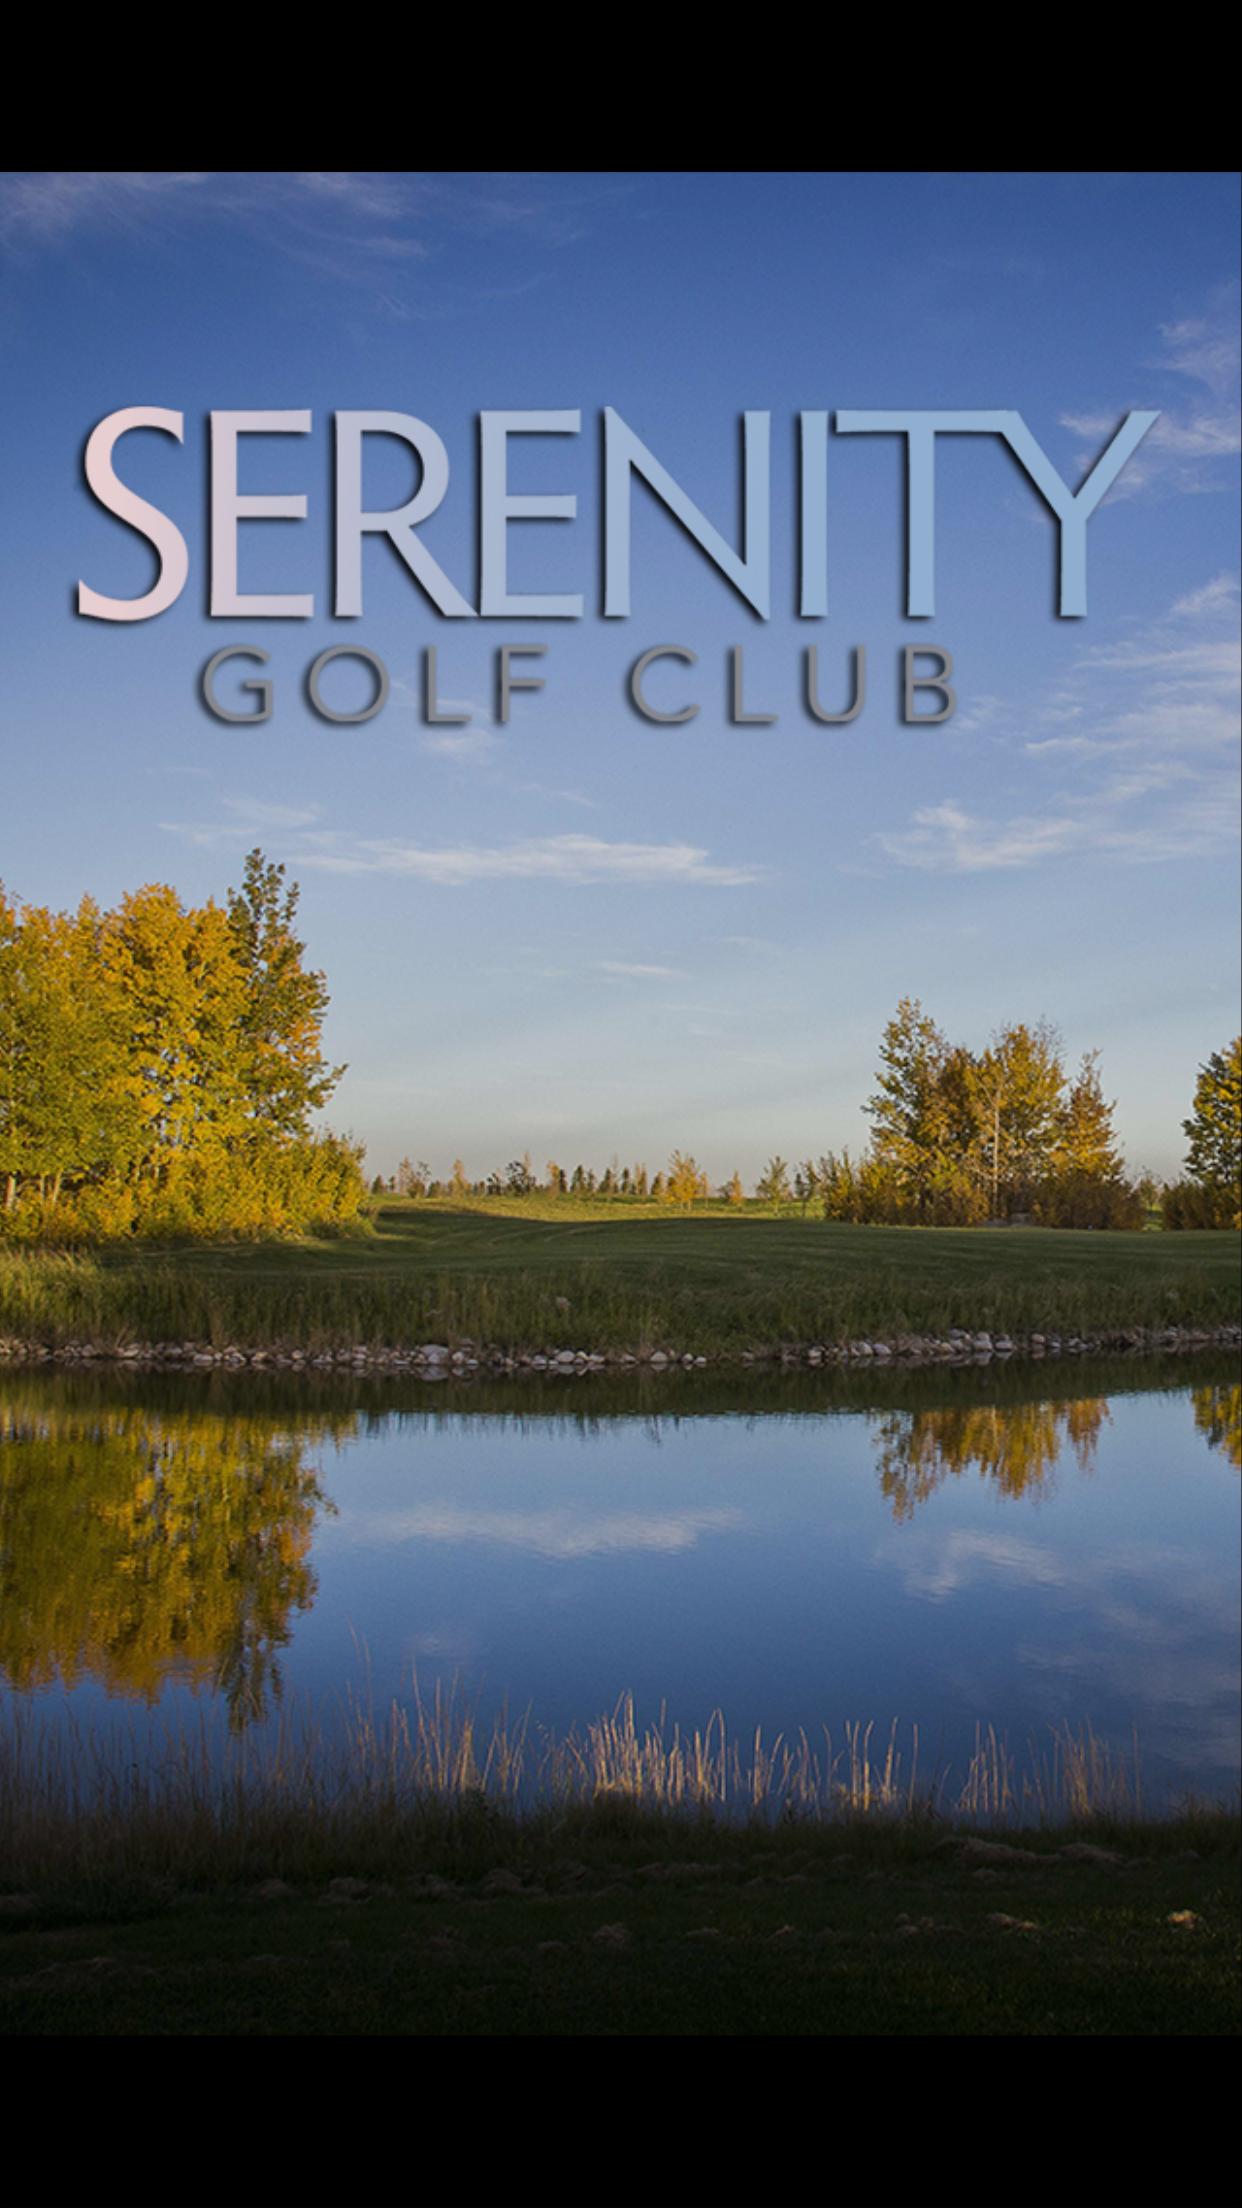 Serenity Golf Club For Android Apk Download - firefox serenity roblox